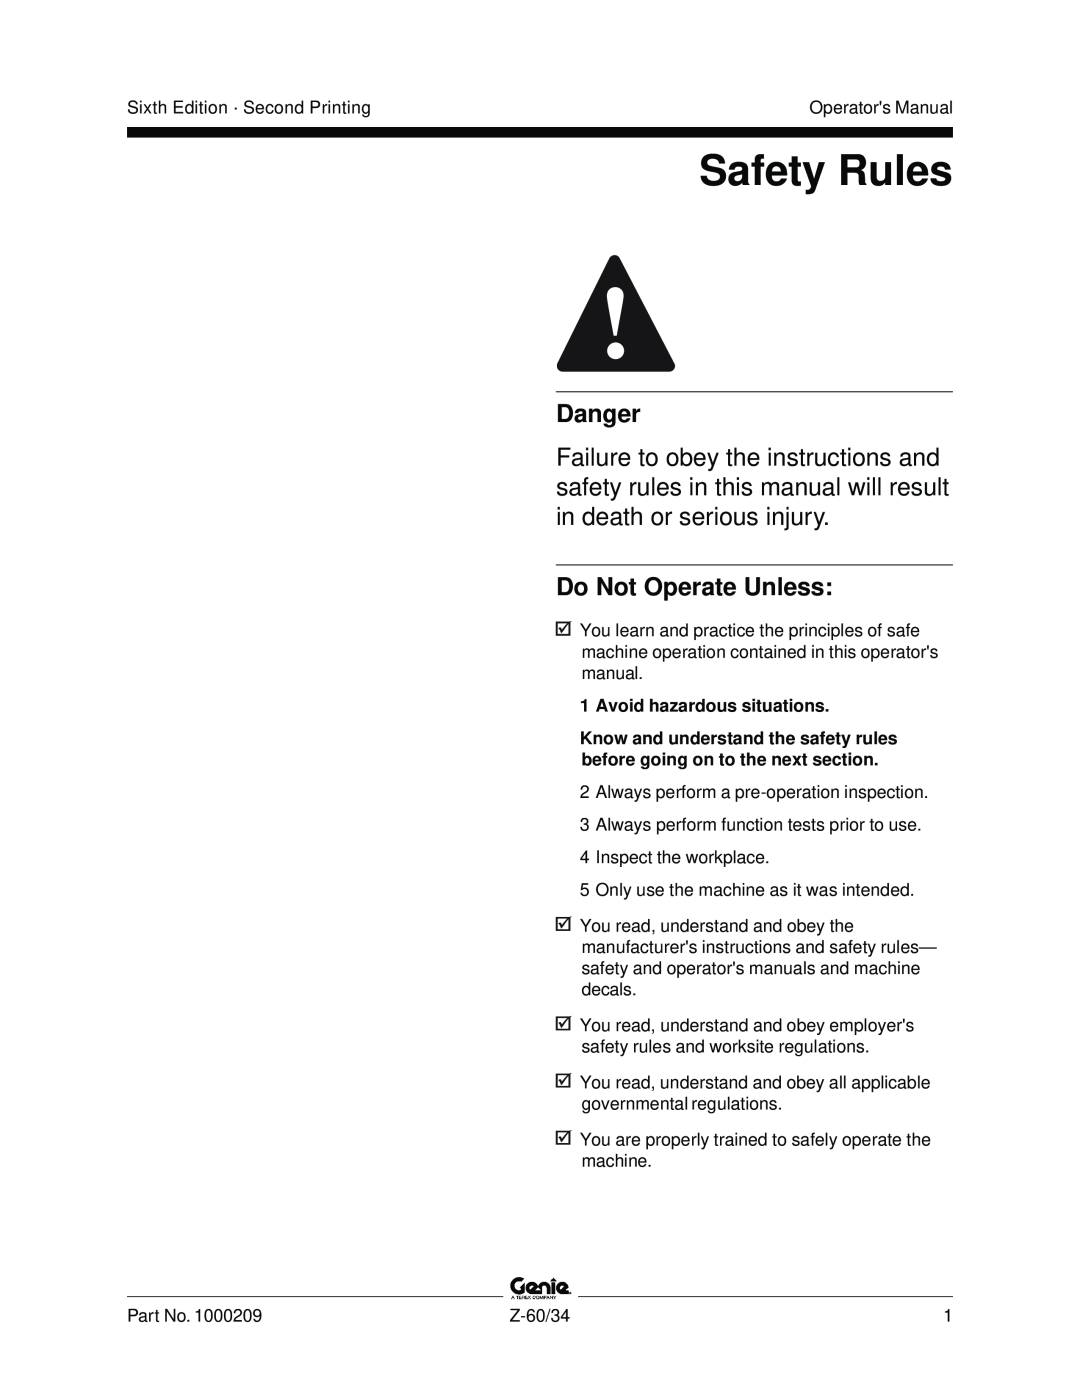 Genie Z-60, Z-34 manual Safety Rules, Danger, Do Not Operate Unless, Avoid hazardous situations 